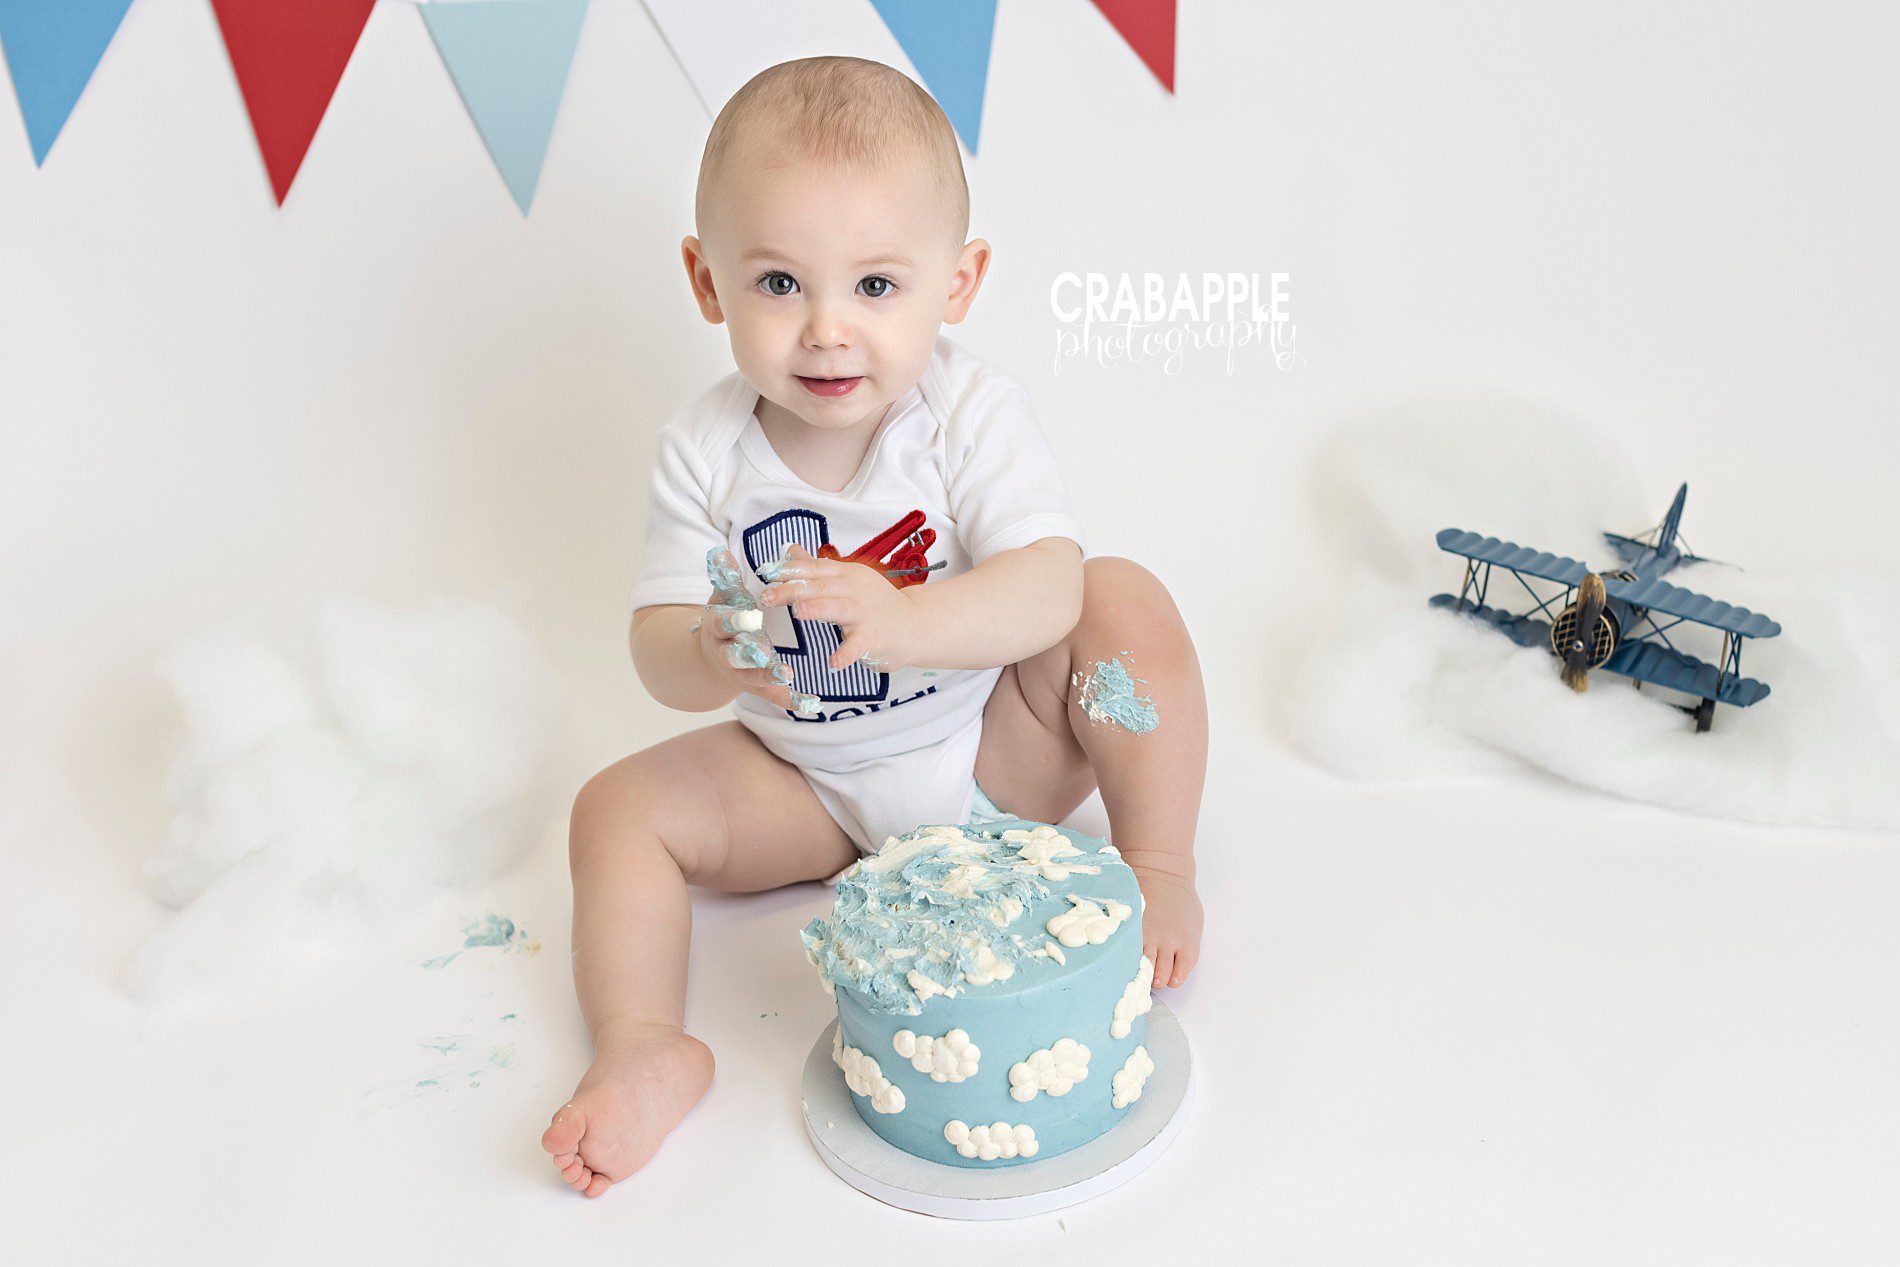 Classic plane themed cake smash with cloud cake, white background, red and blue bunting, and cotton clouds.